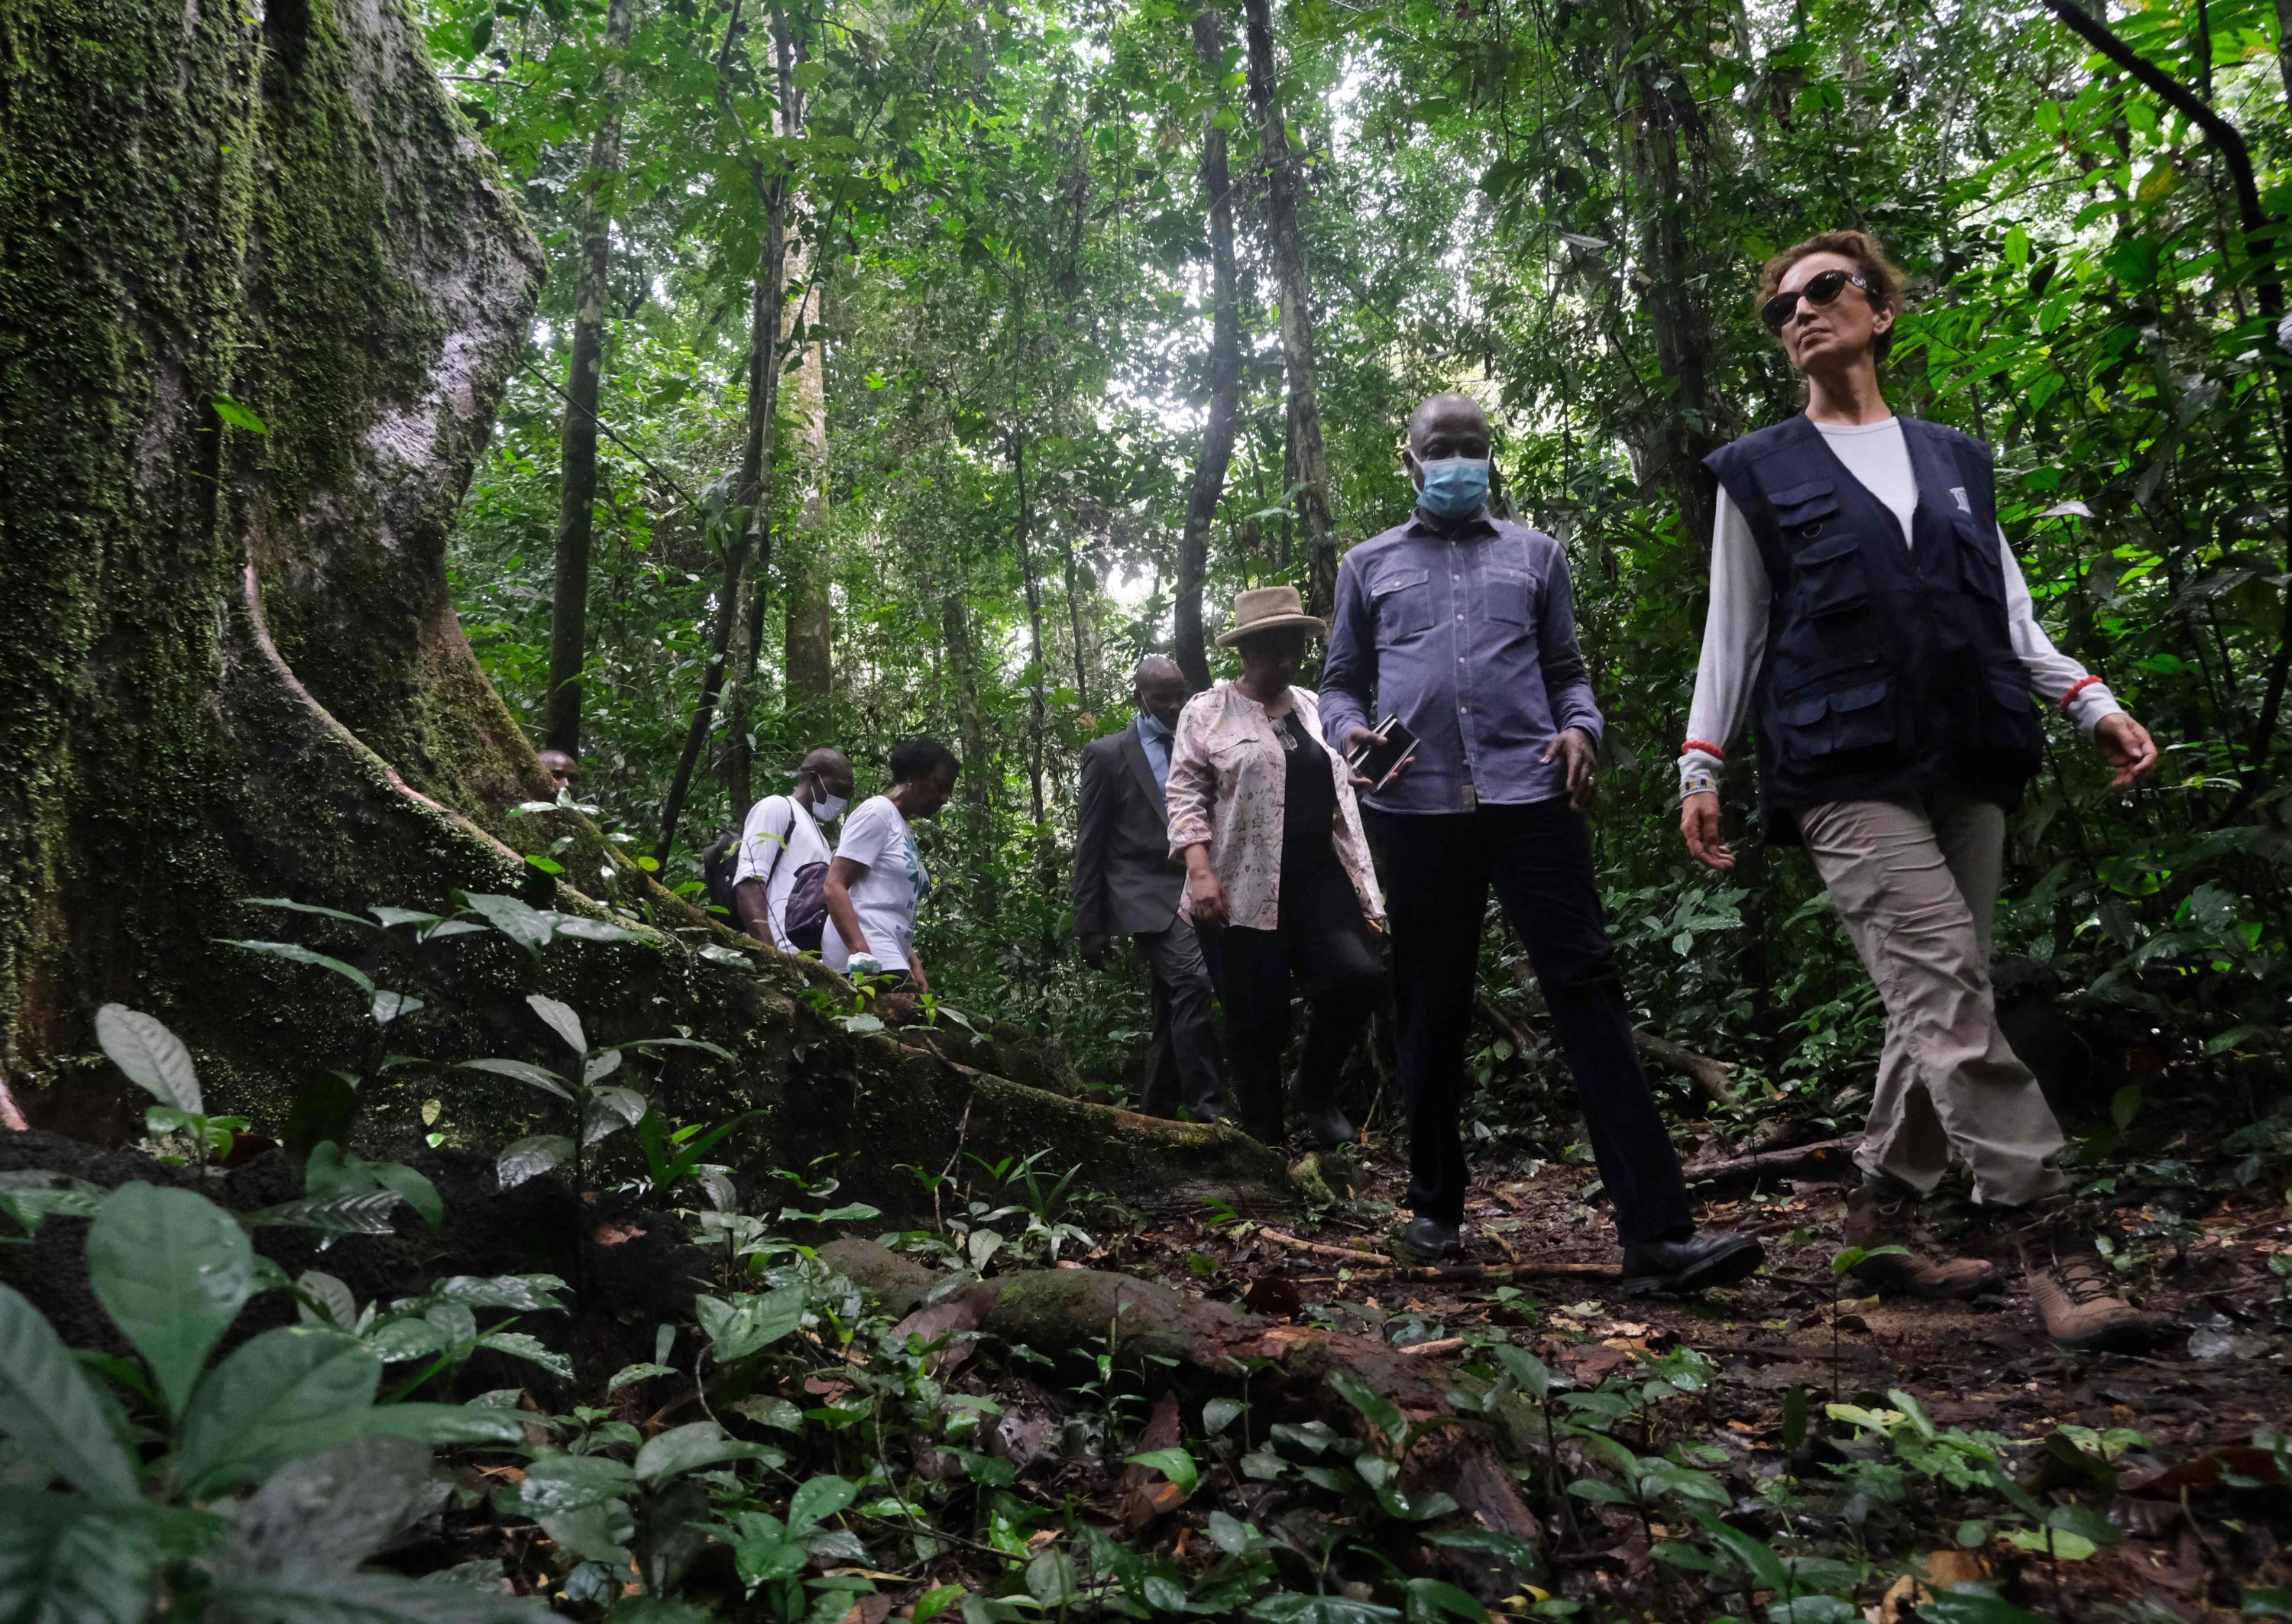 UNESCO chief Audrey Azoulay (R) visits the Oban Biosphere Reserve, in Calabar, Cross River, Nigeria, Sept. 12, 2021. (AFP Photo)